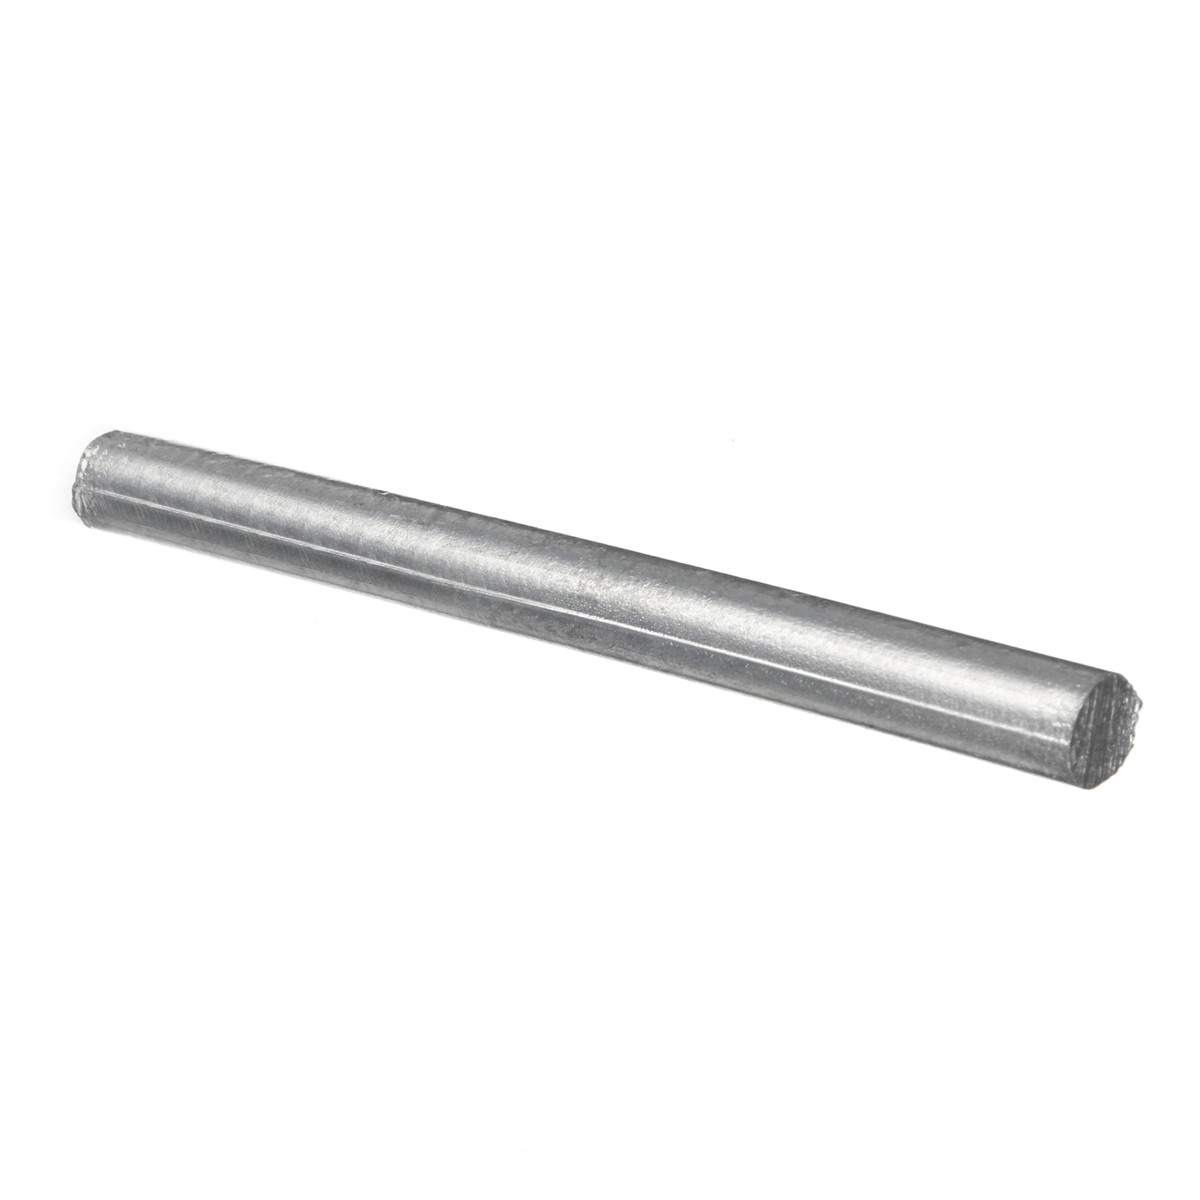 04-inch-x-4-inch-High-Purity-Zn-9995-Zinc-Metal-Rod-Anode-Electroplating-Solid-Round-Bar-1396373-6